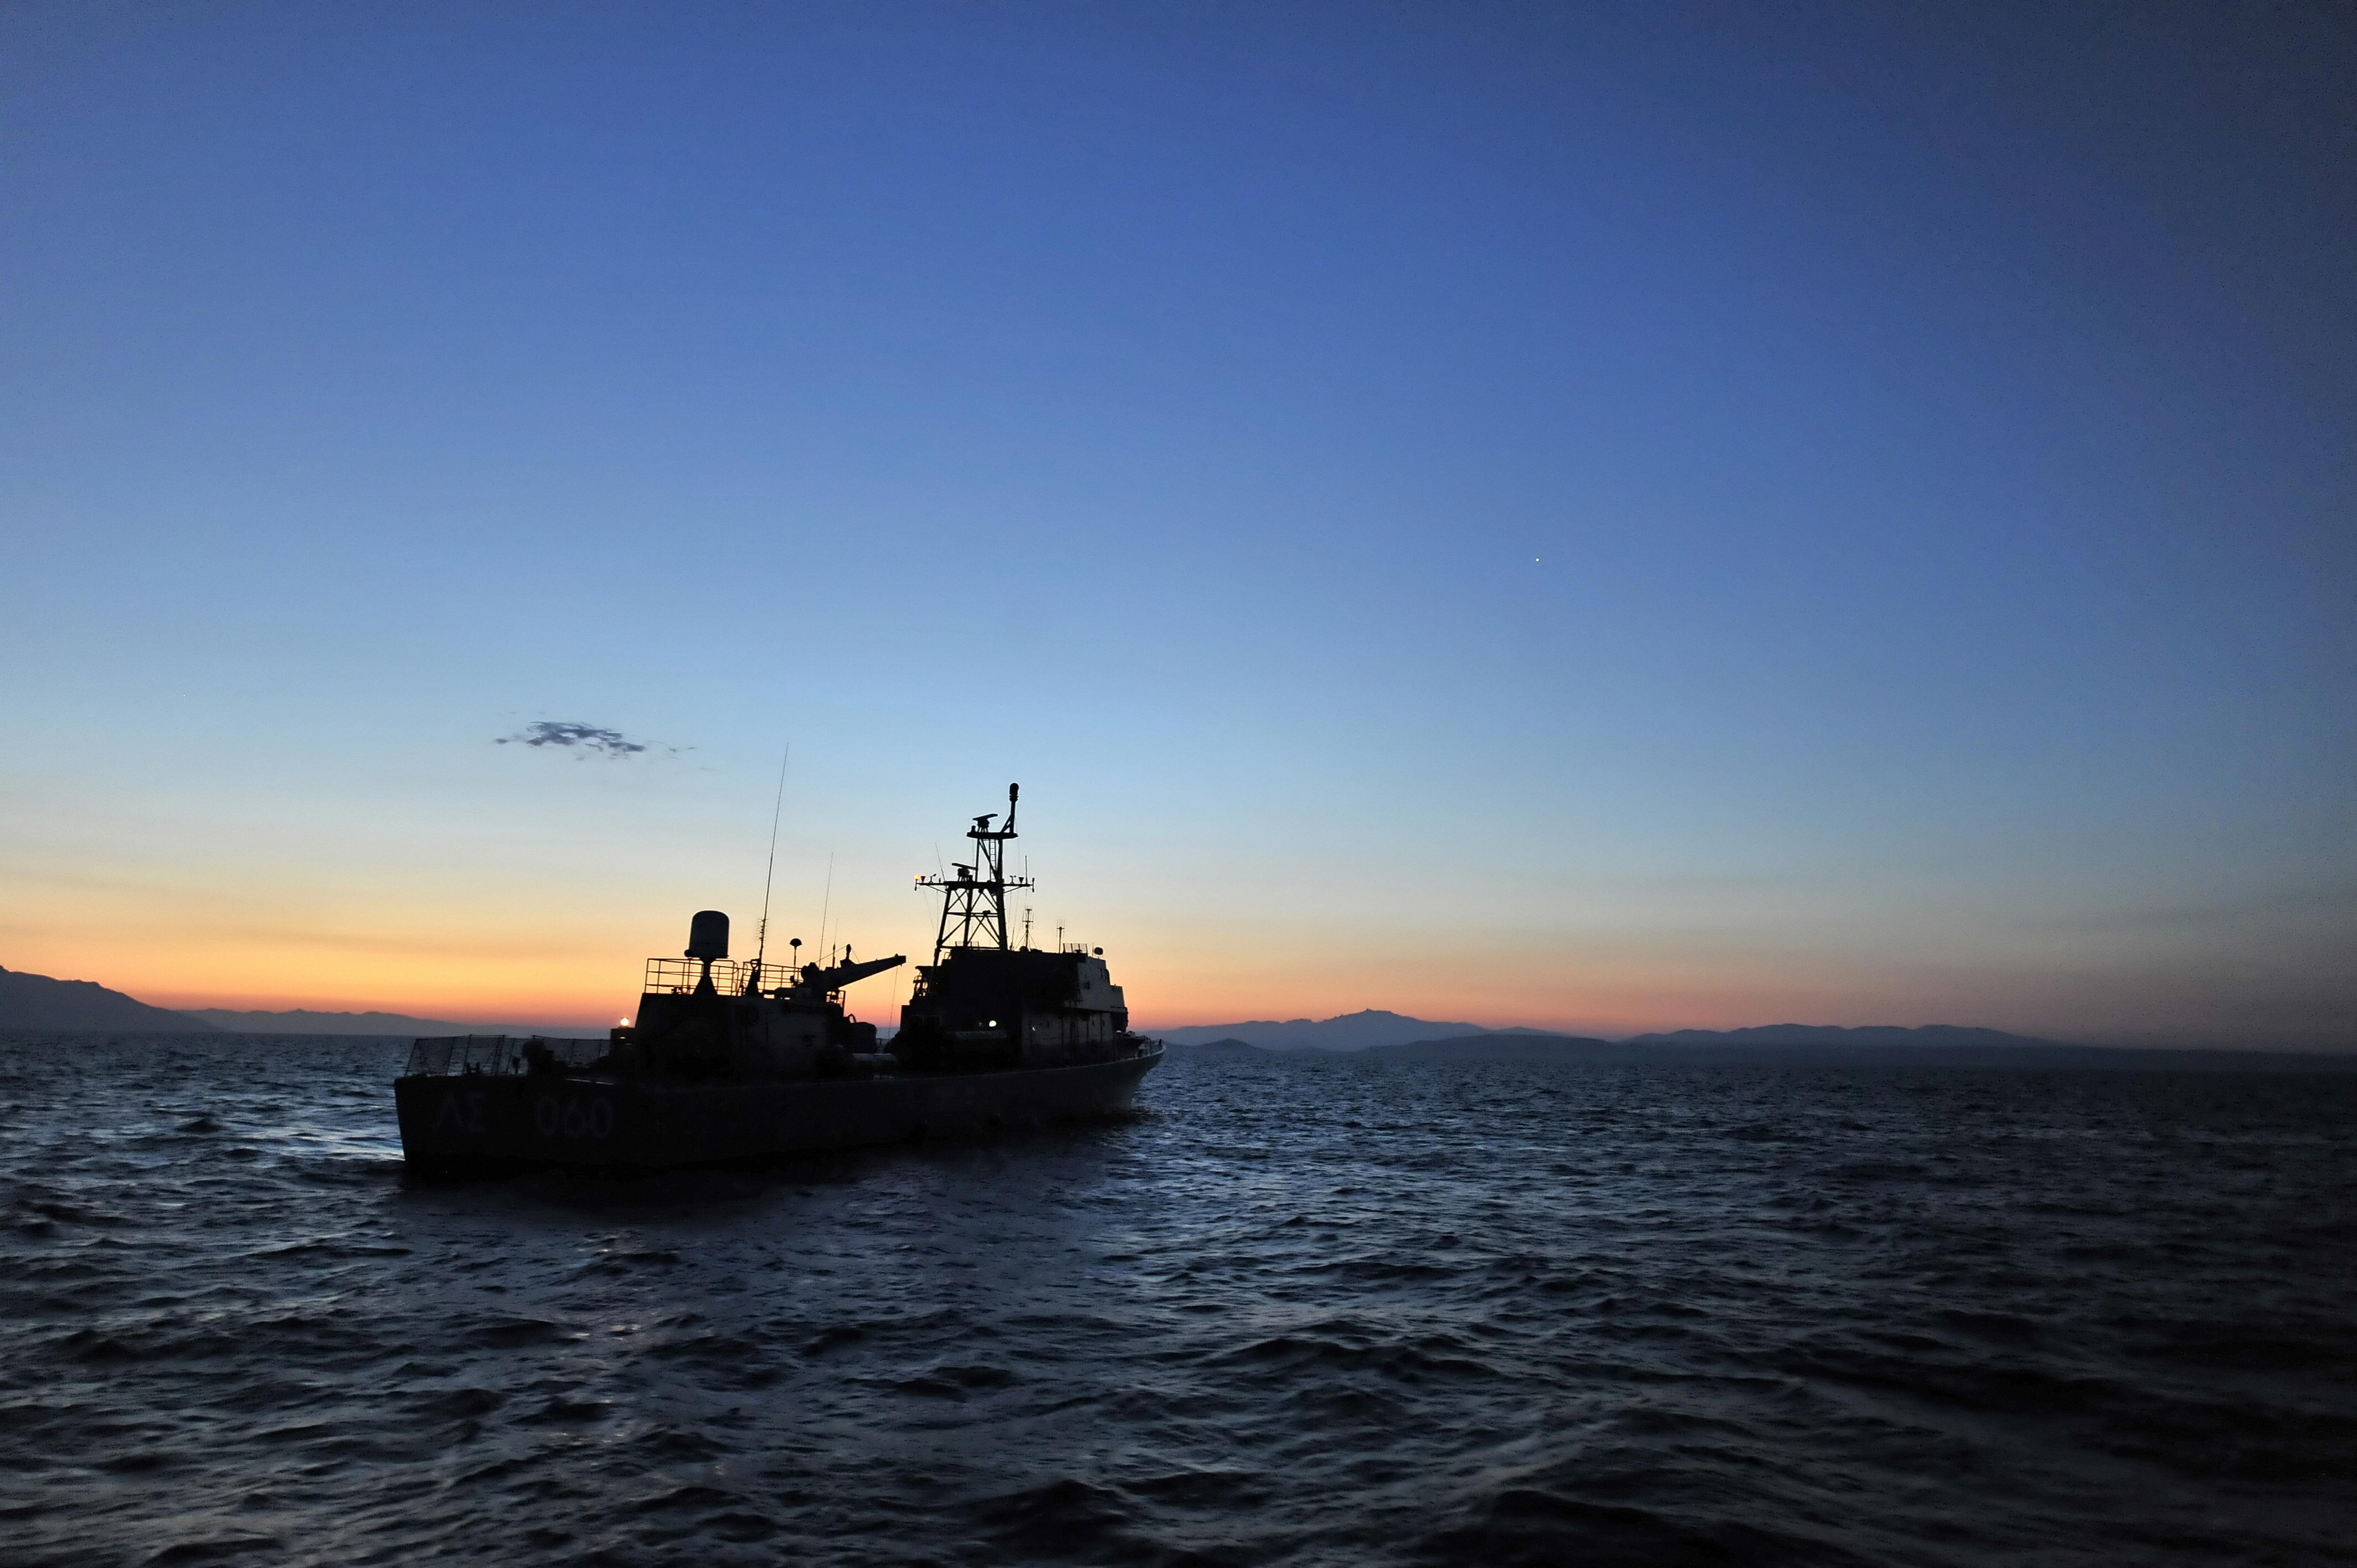 At Least 6 Dead After Migrant Boat Sinks Off Turkish Coast